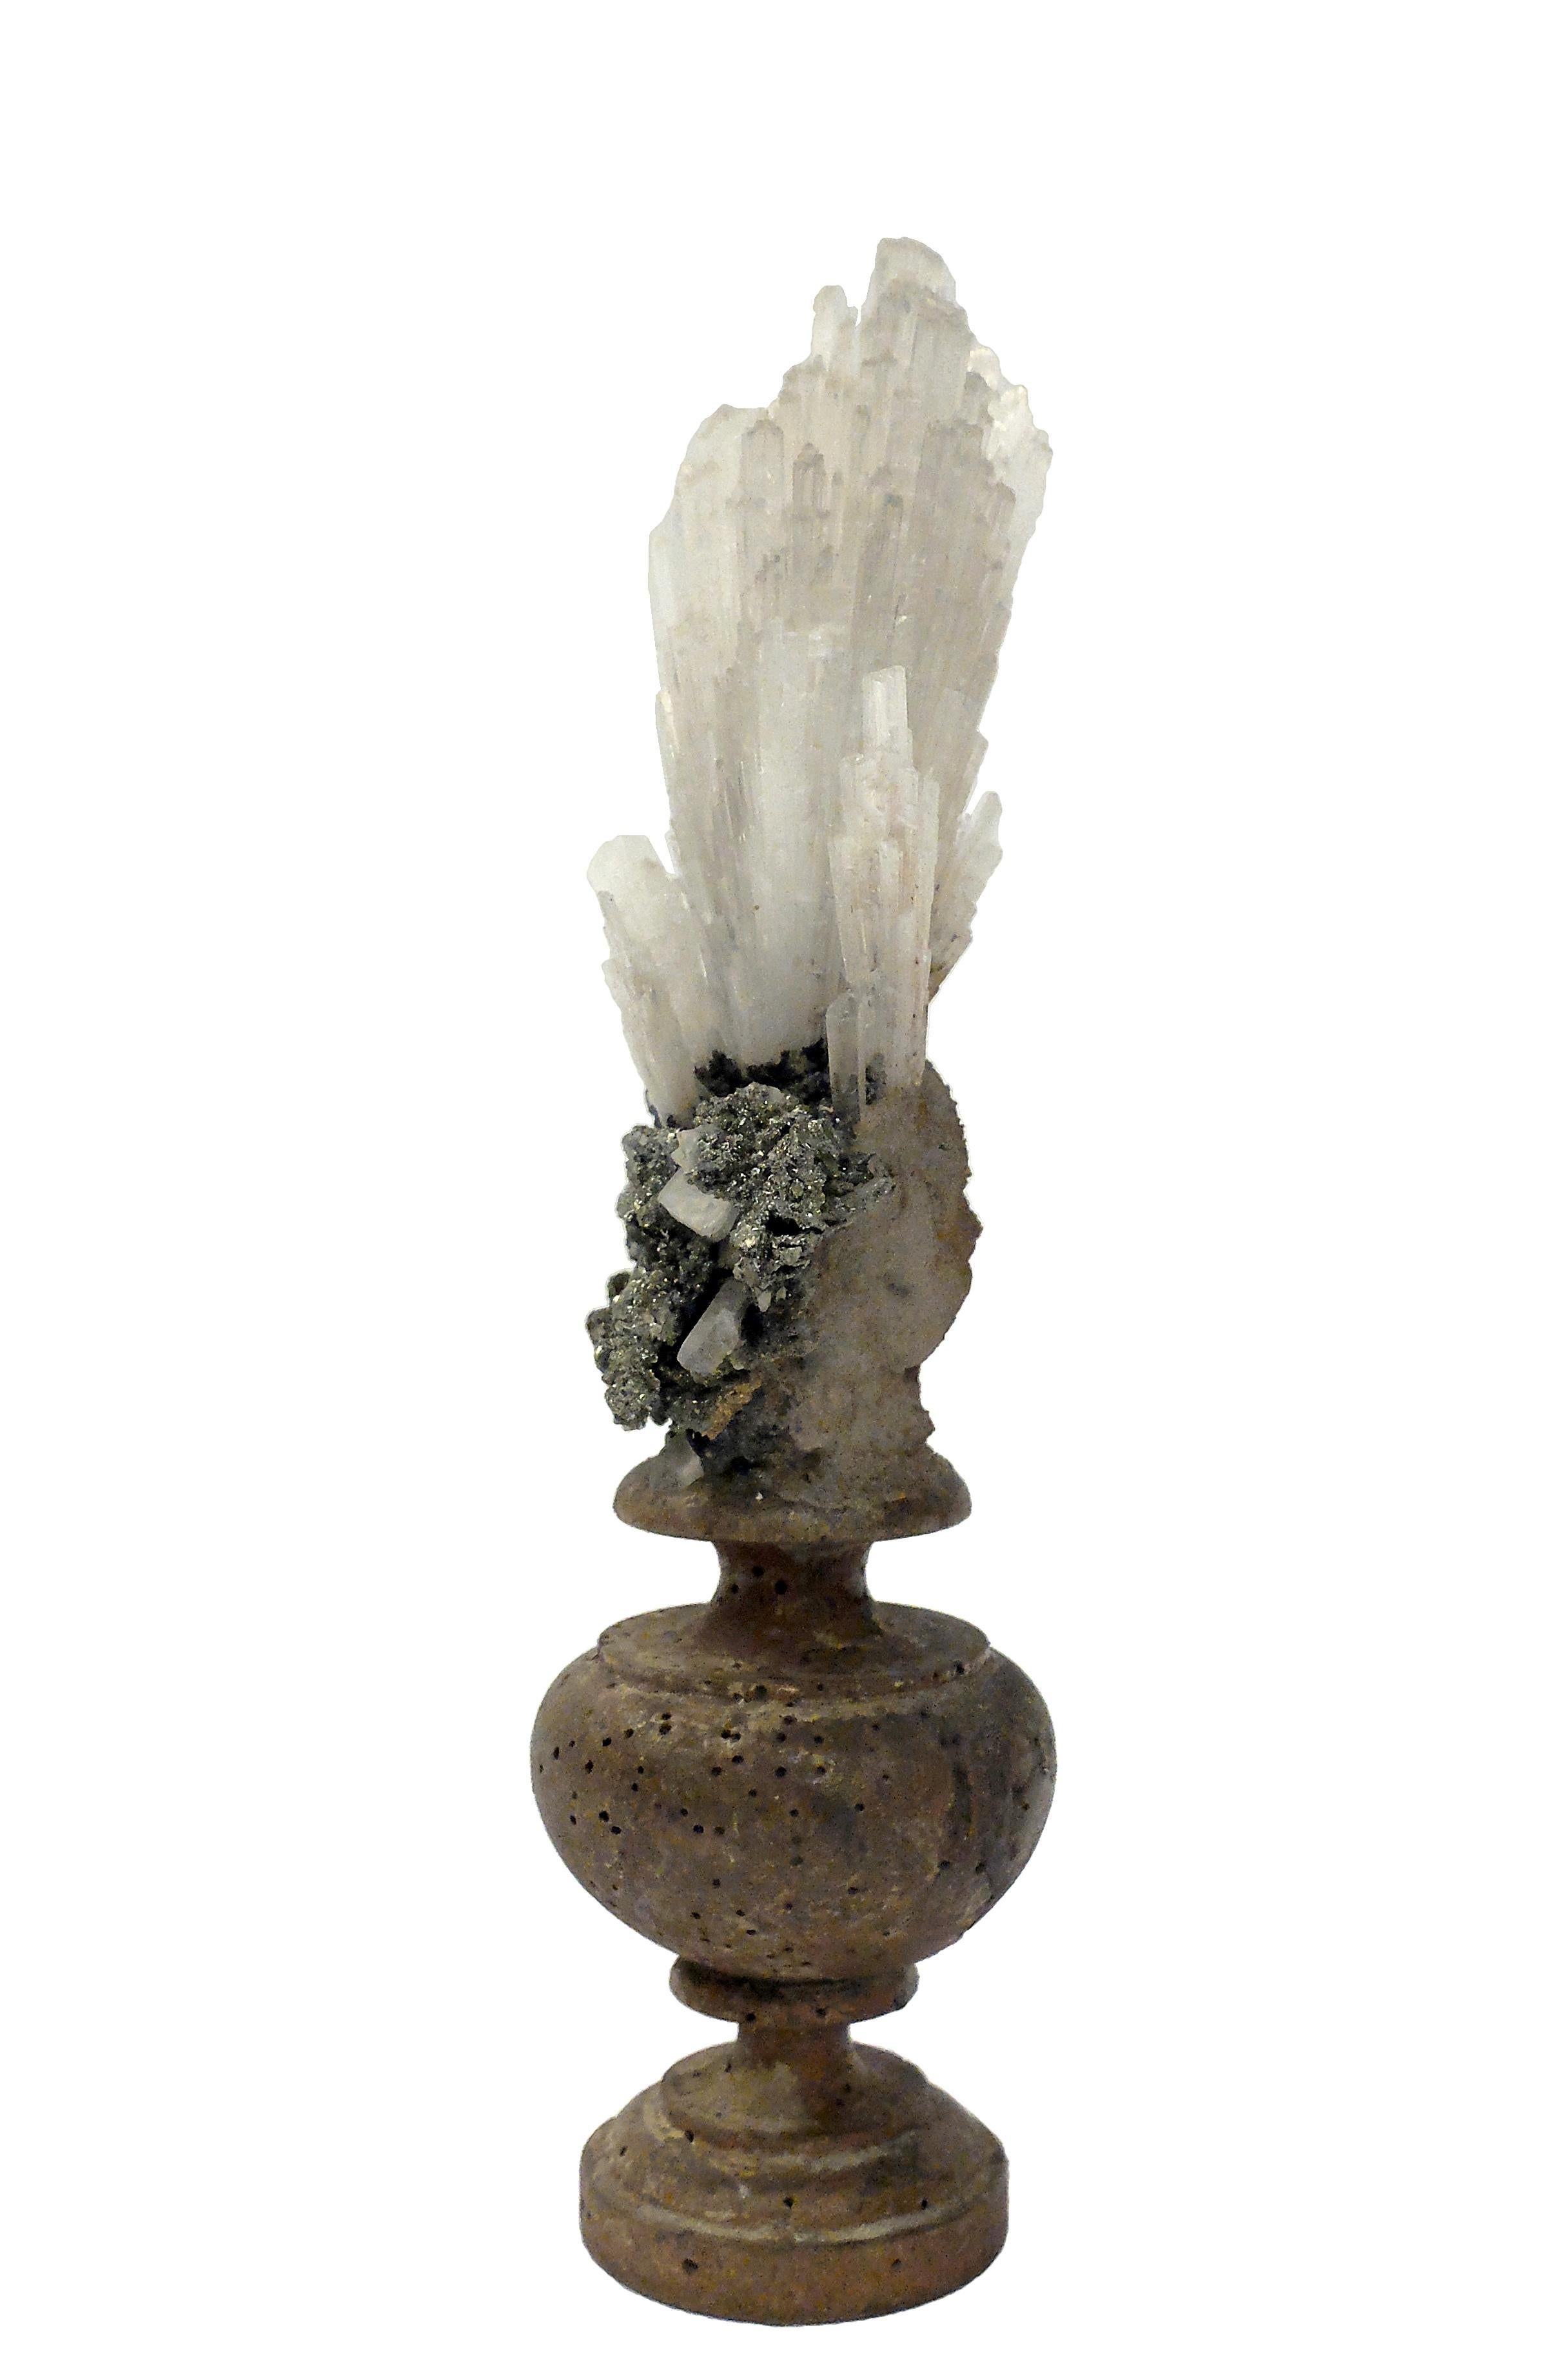 A Naturalia mineral specimen: A composition with Scolecite and Pyrite crystals, mounted over a guild plated wooden base on a vase shape.